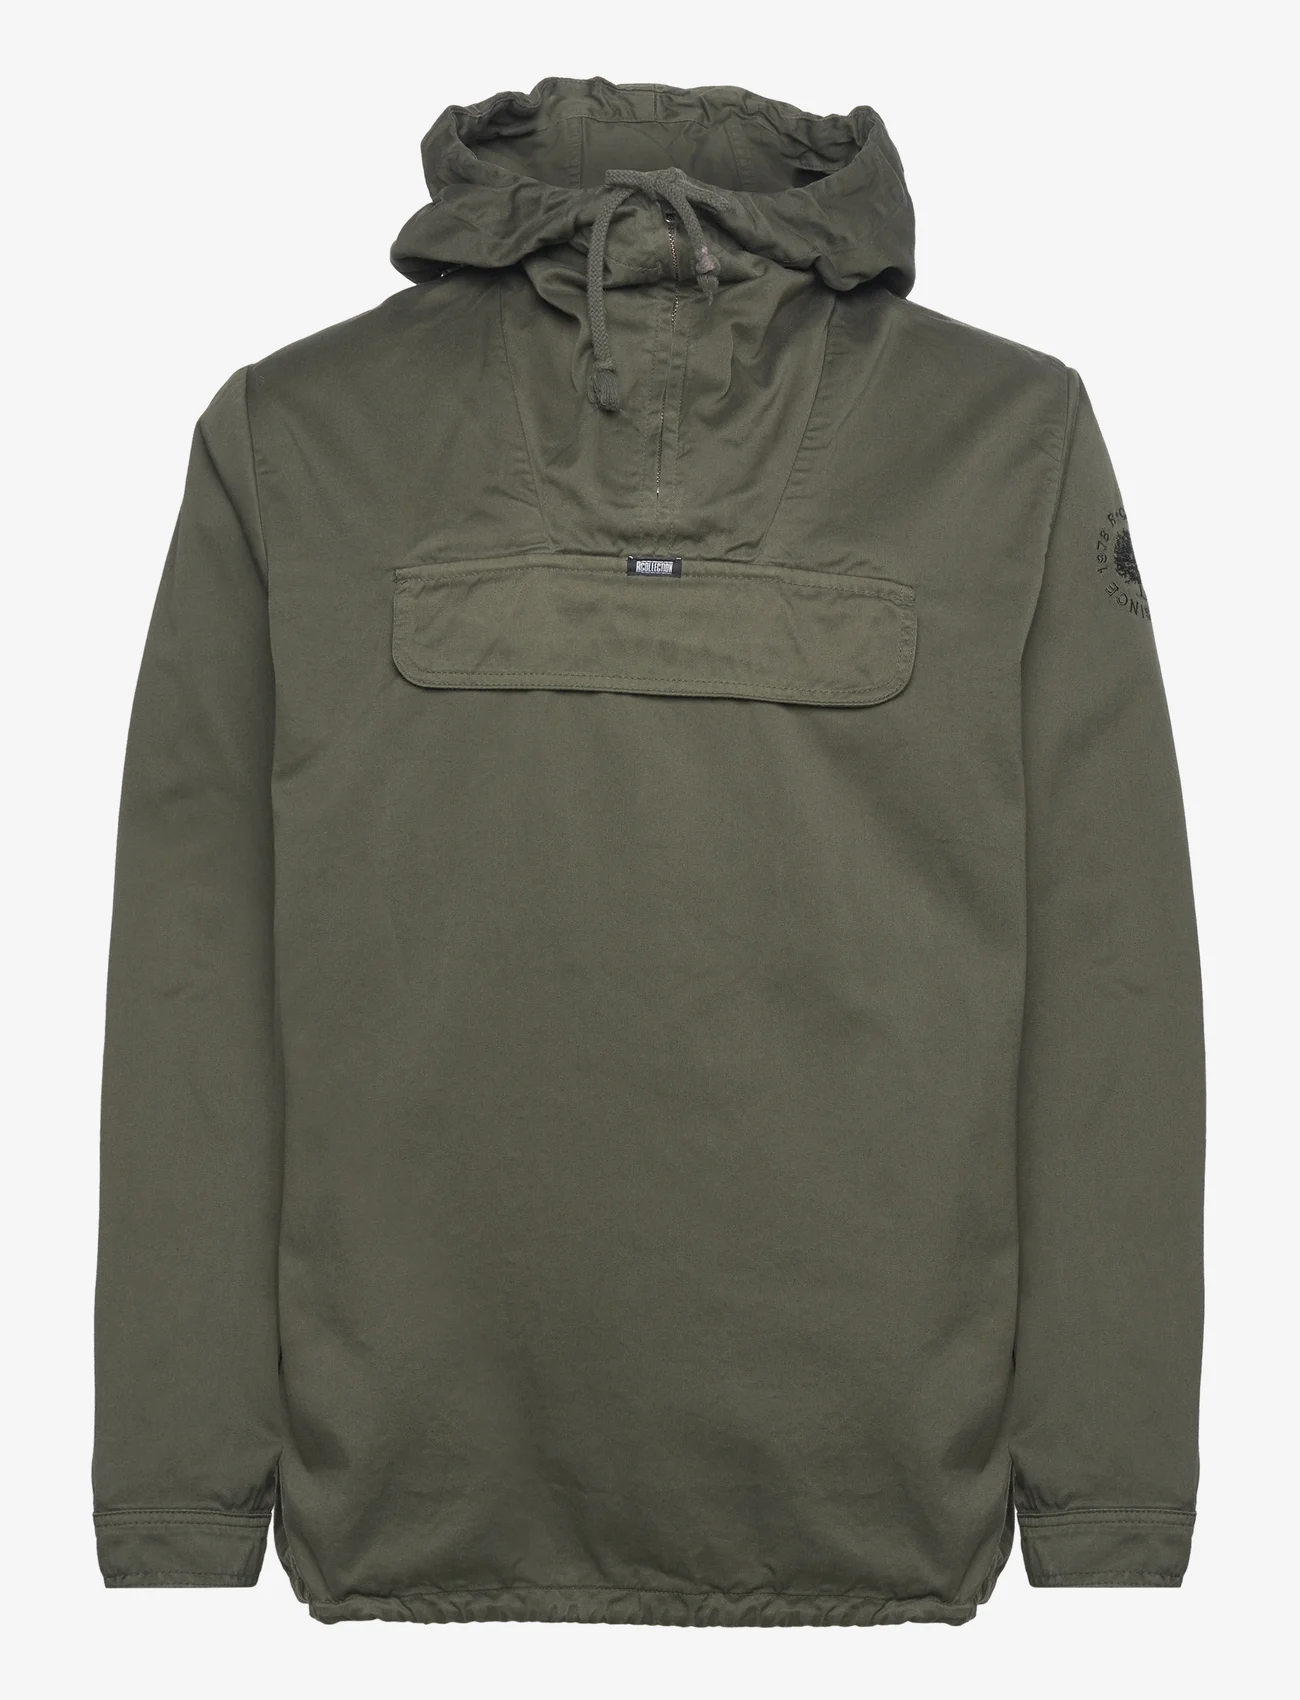 R-Collection - Classic Anorak - anoraks - olive green - 0